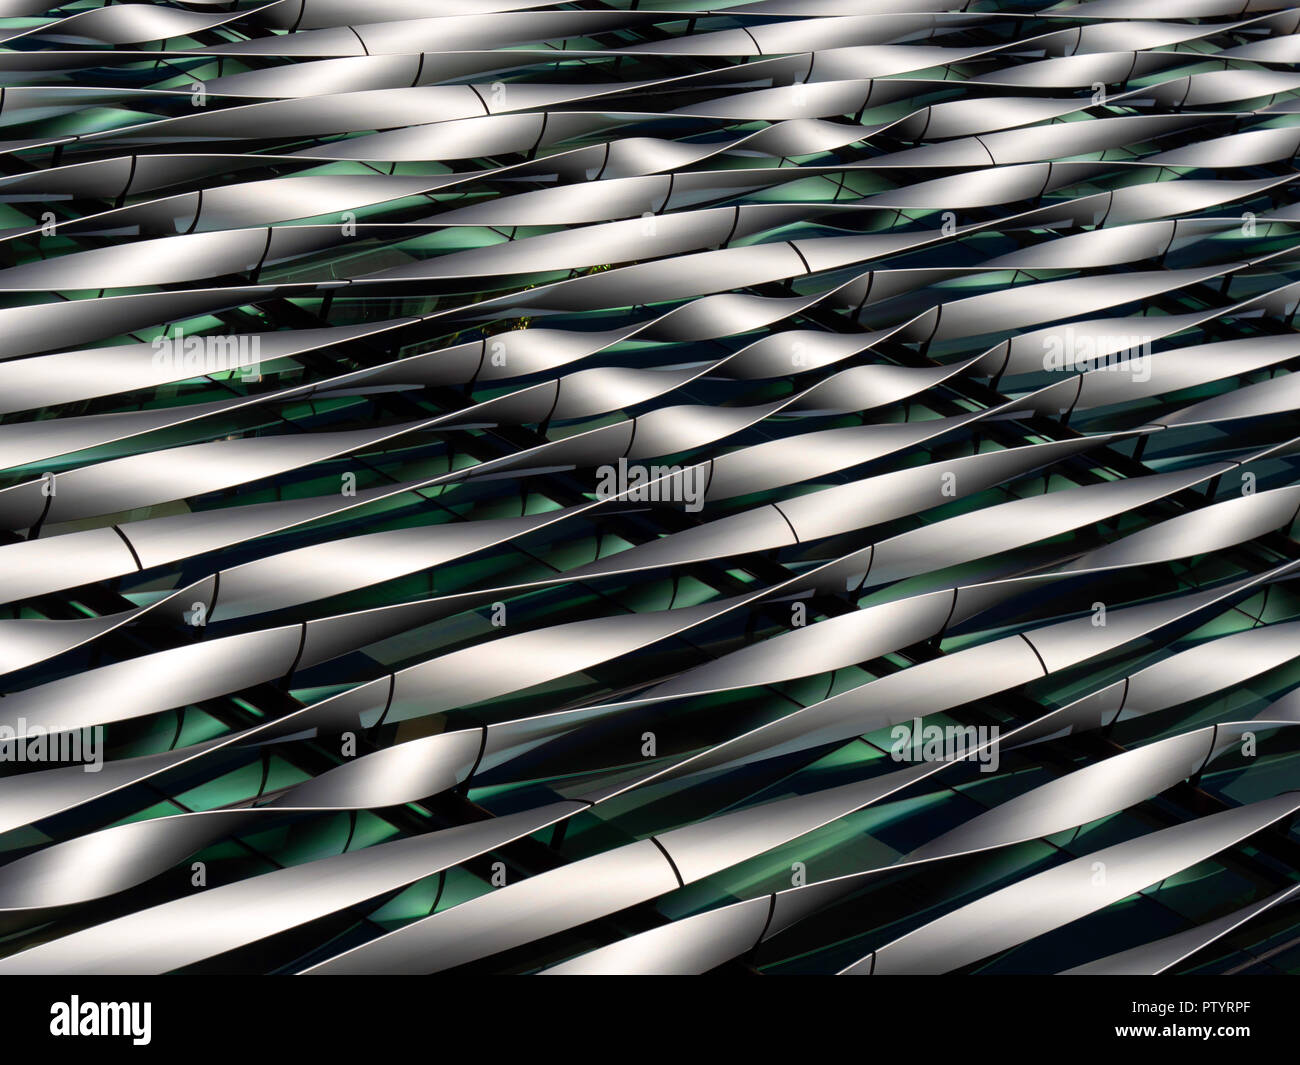 Twisted metal strips with a futuristic look Stock Photo